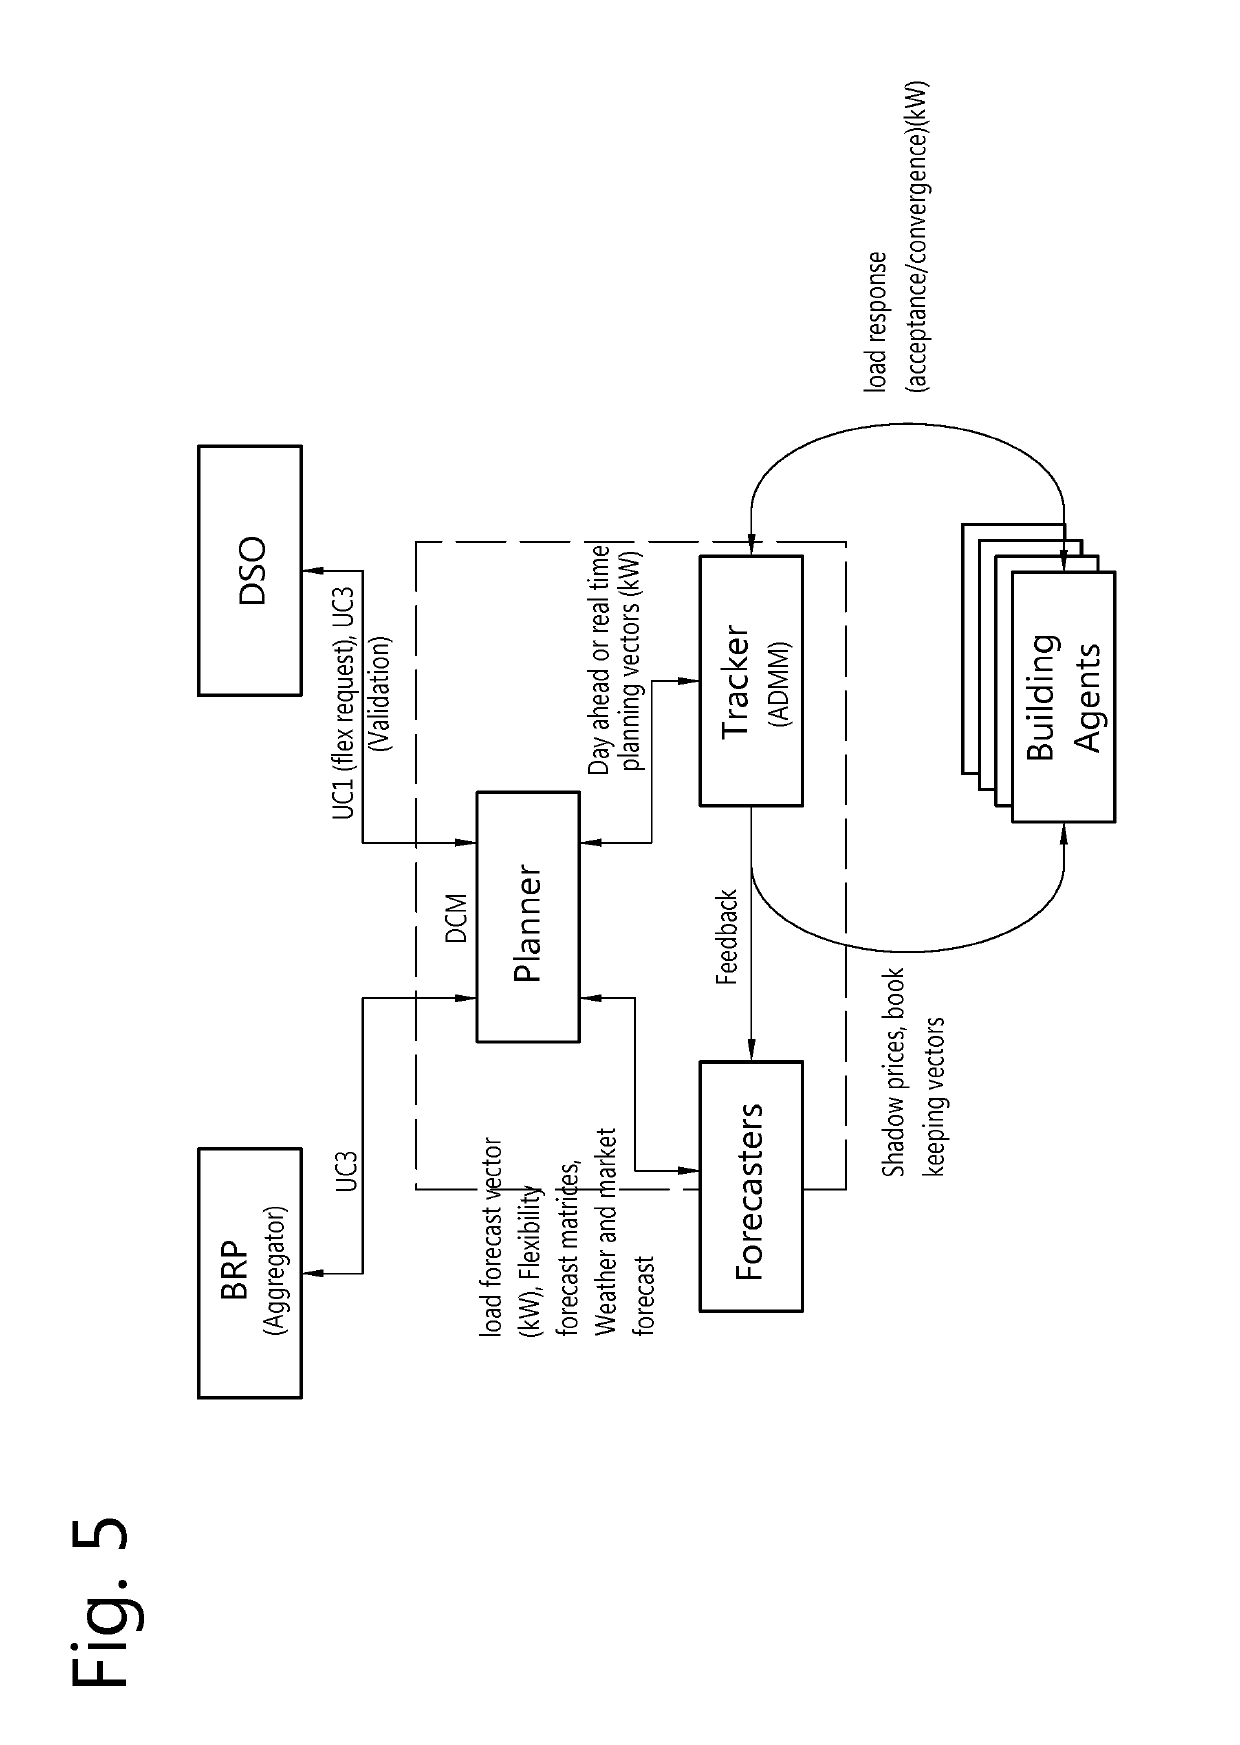 Hierarchical implicit controller for shielded system in a grid